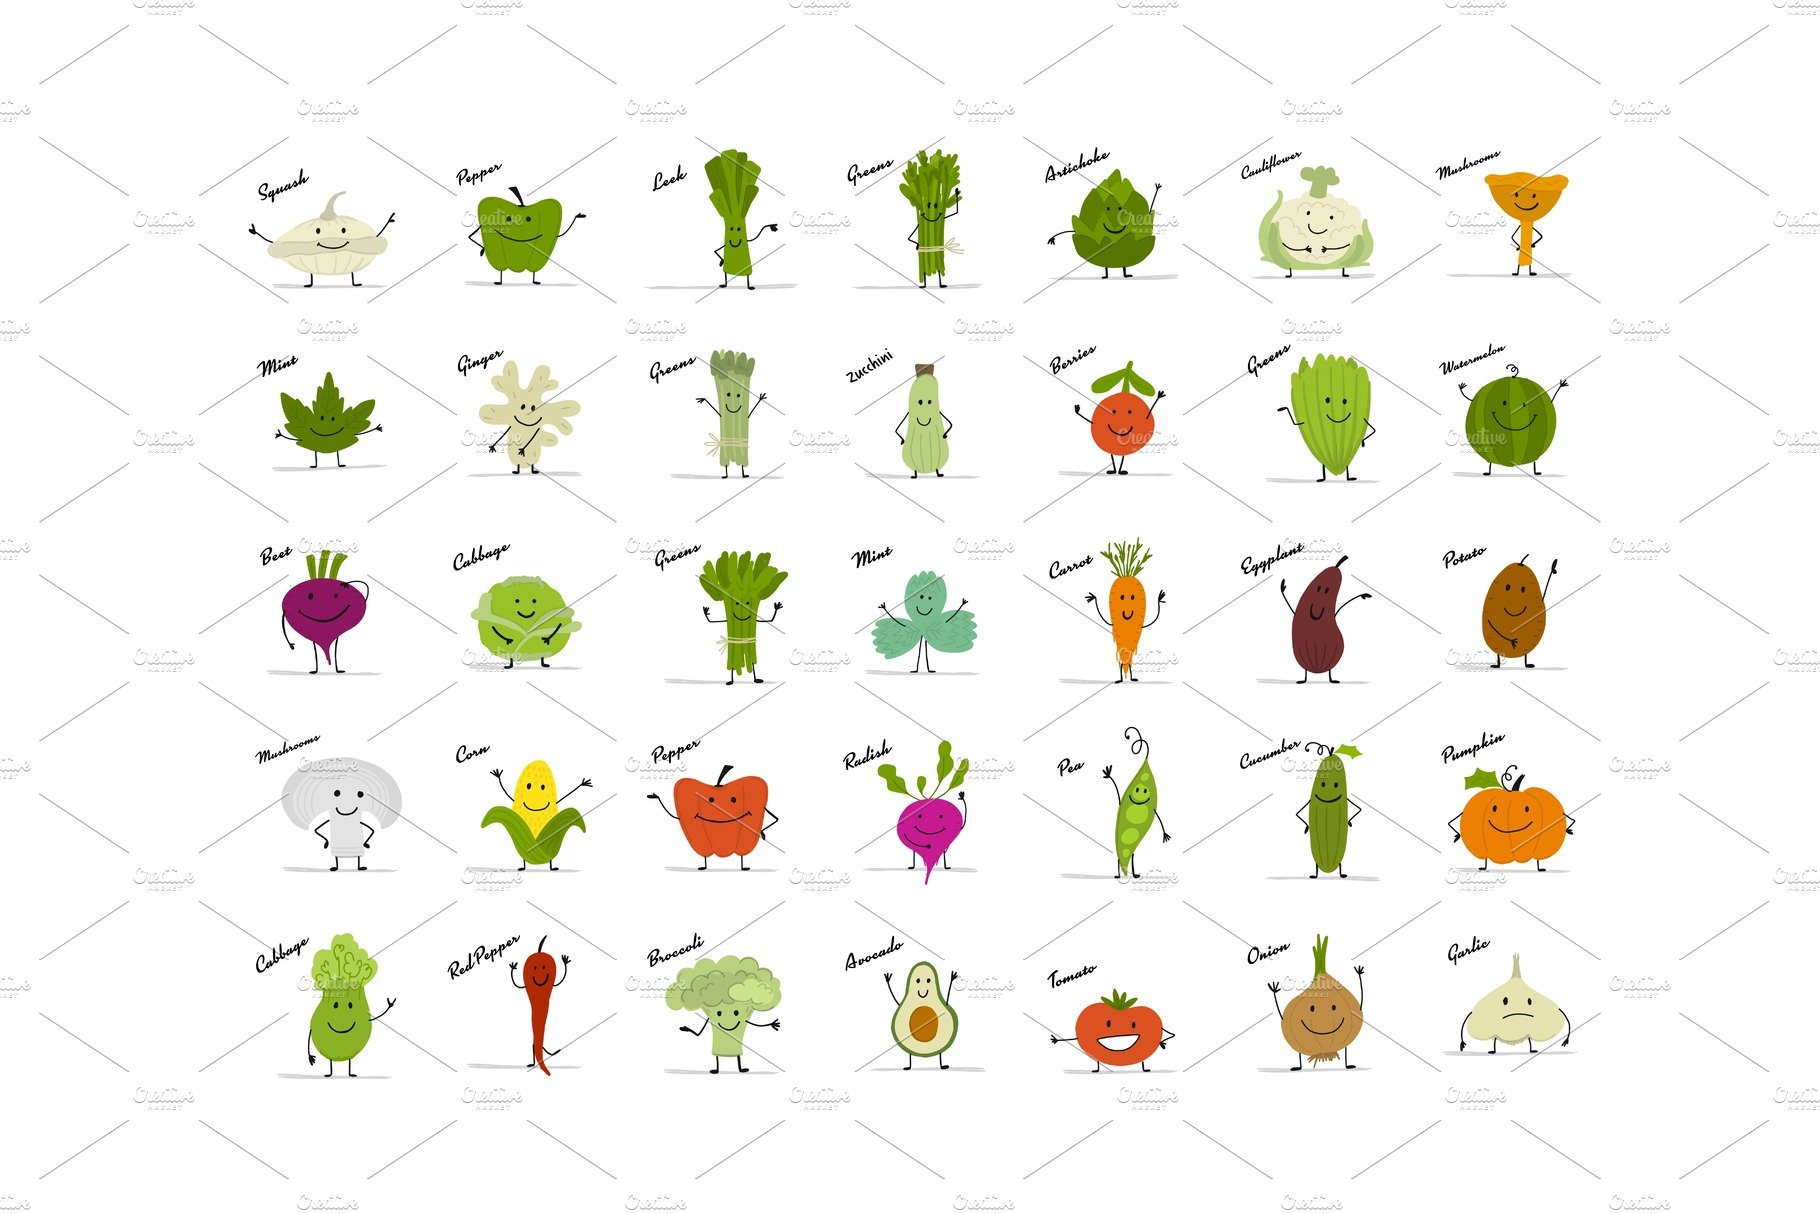 Funny smiling vegetables and greens cover image.